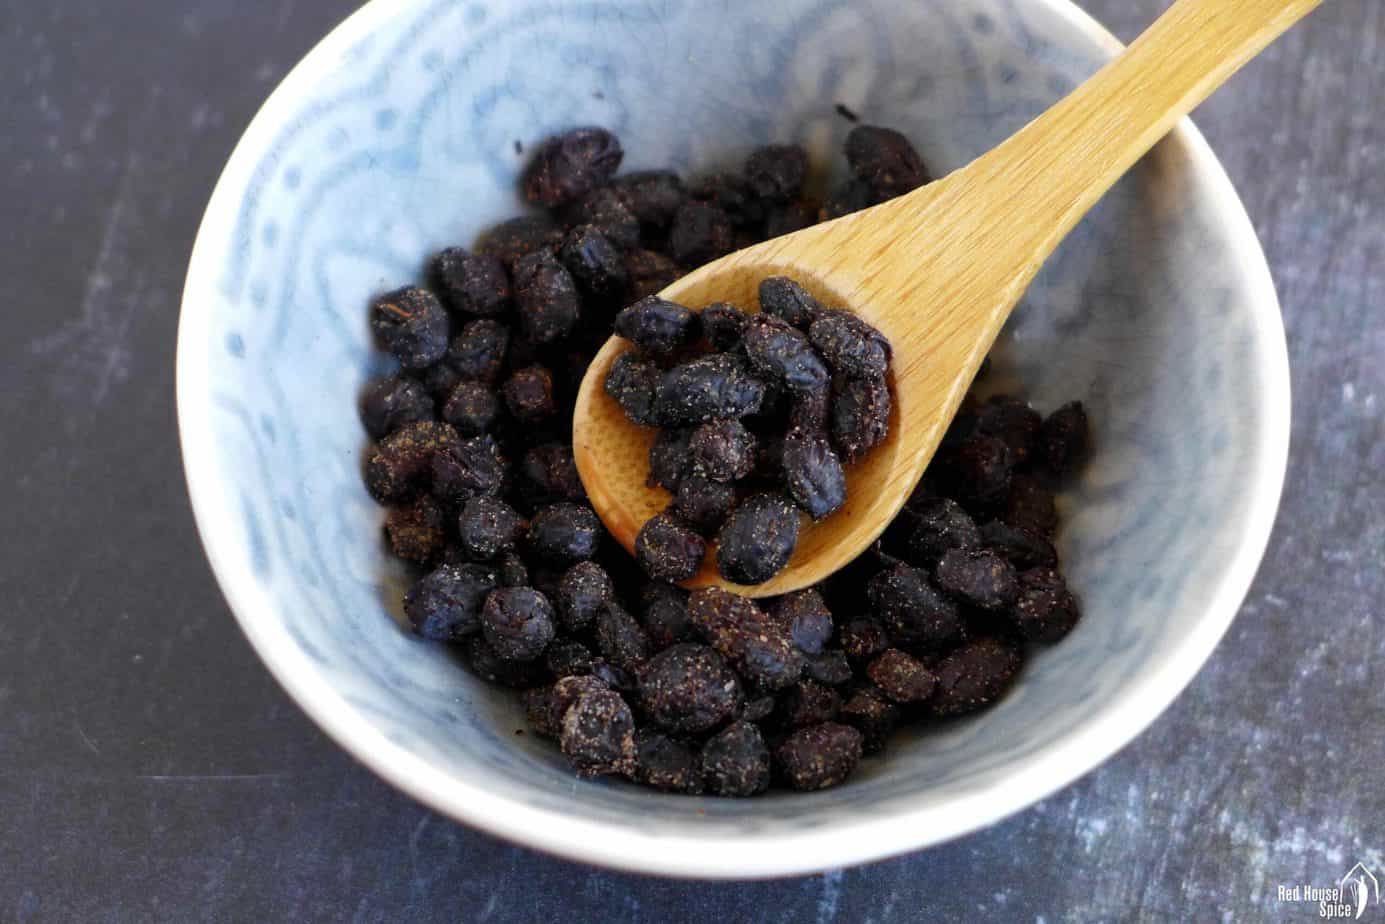 Chinese fermented black beans